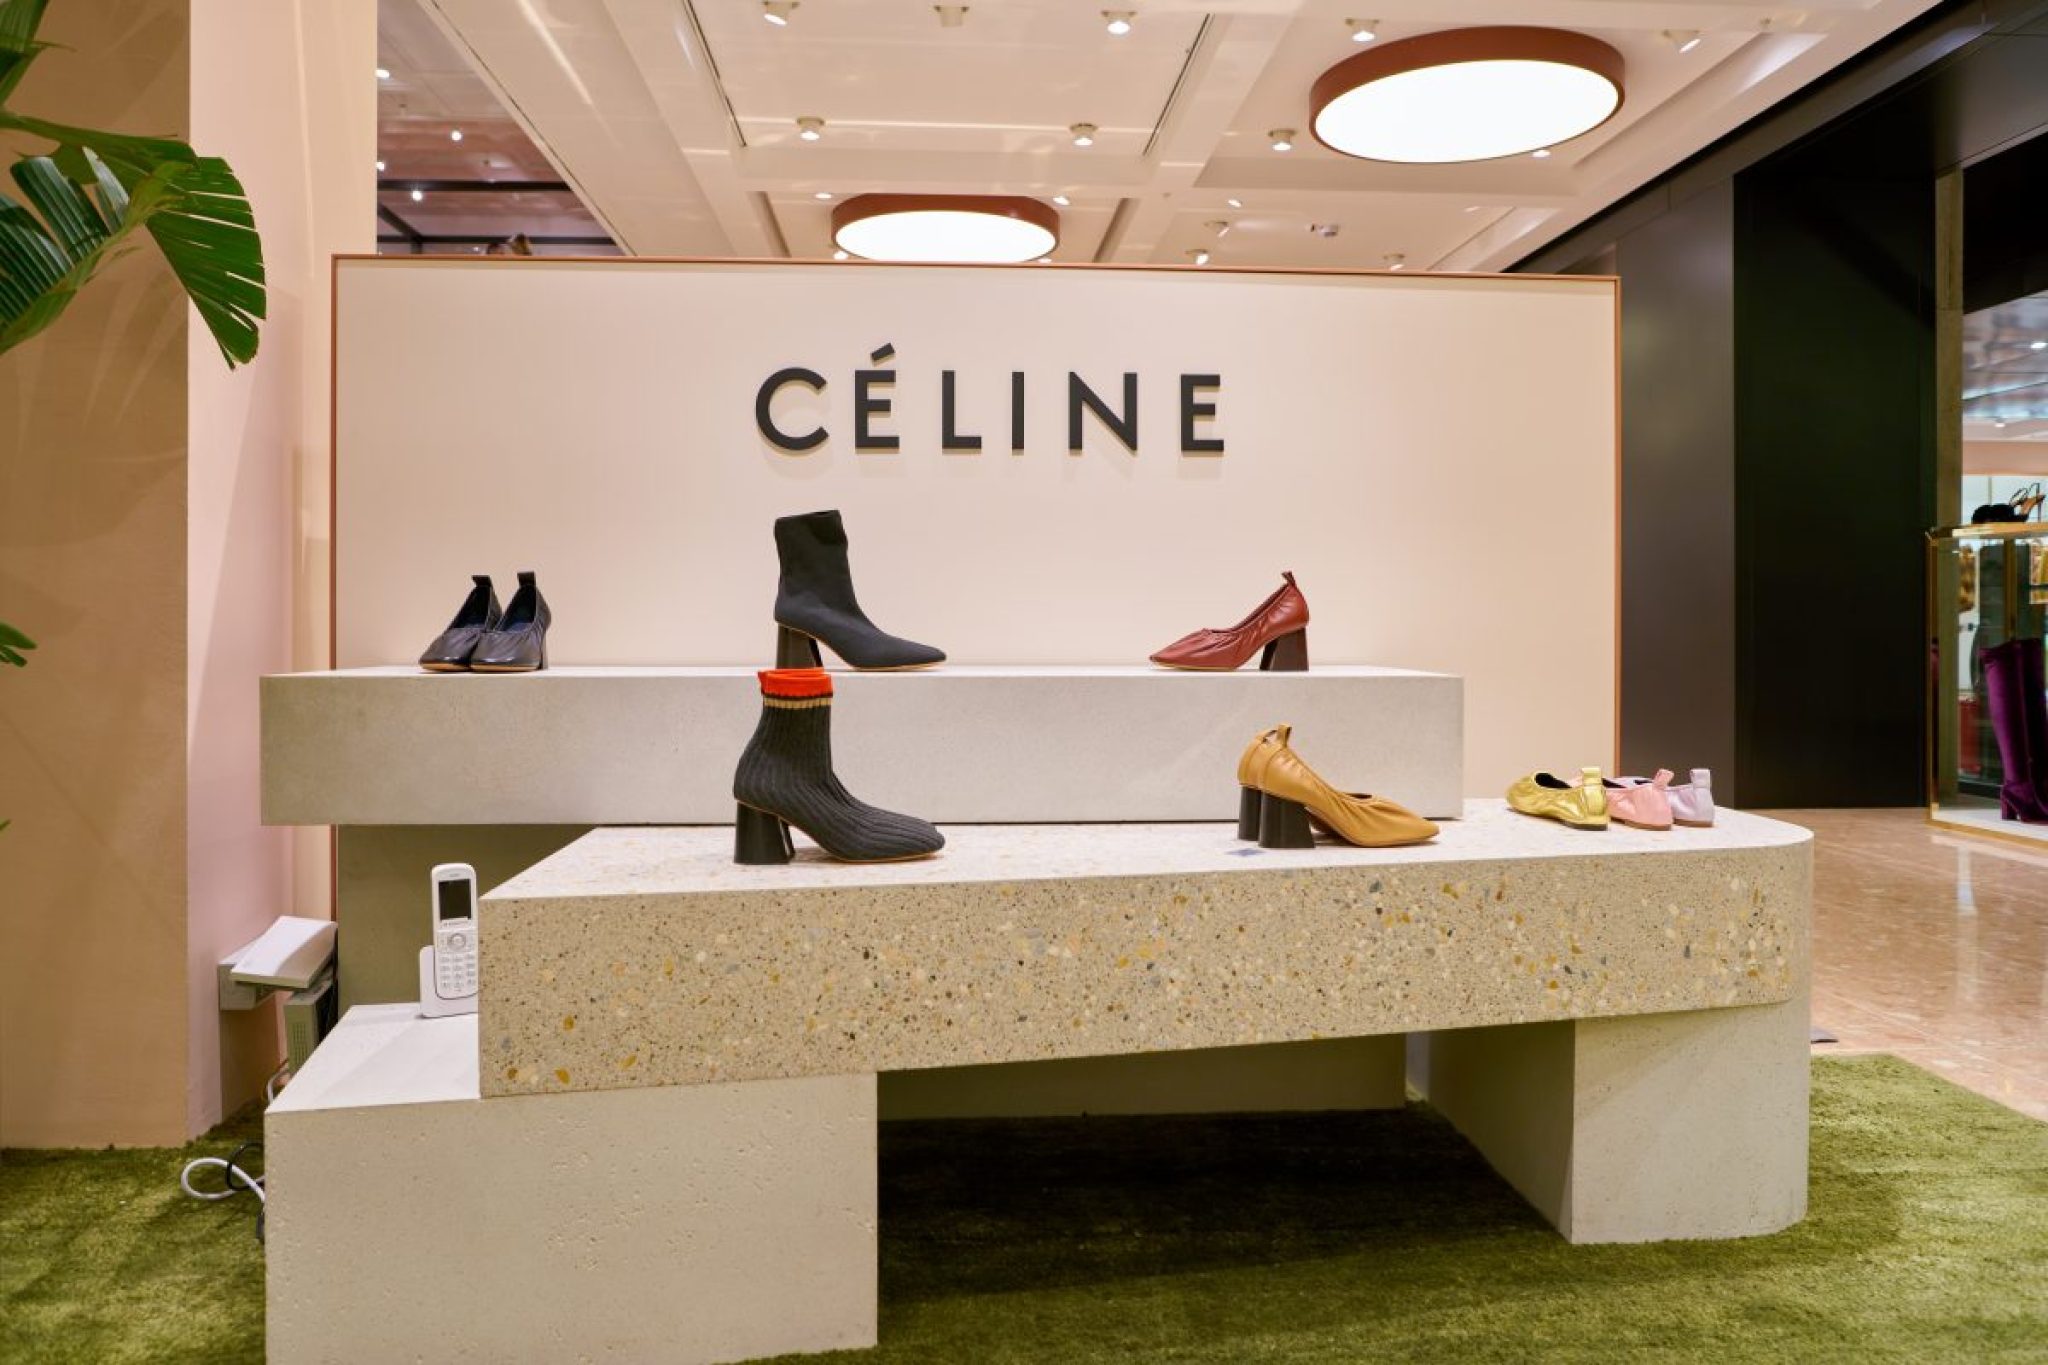 Celine Shoe Size Chart Why Is Celine Brand So Popular? The Shoe Box NYC